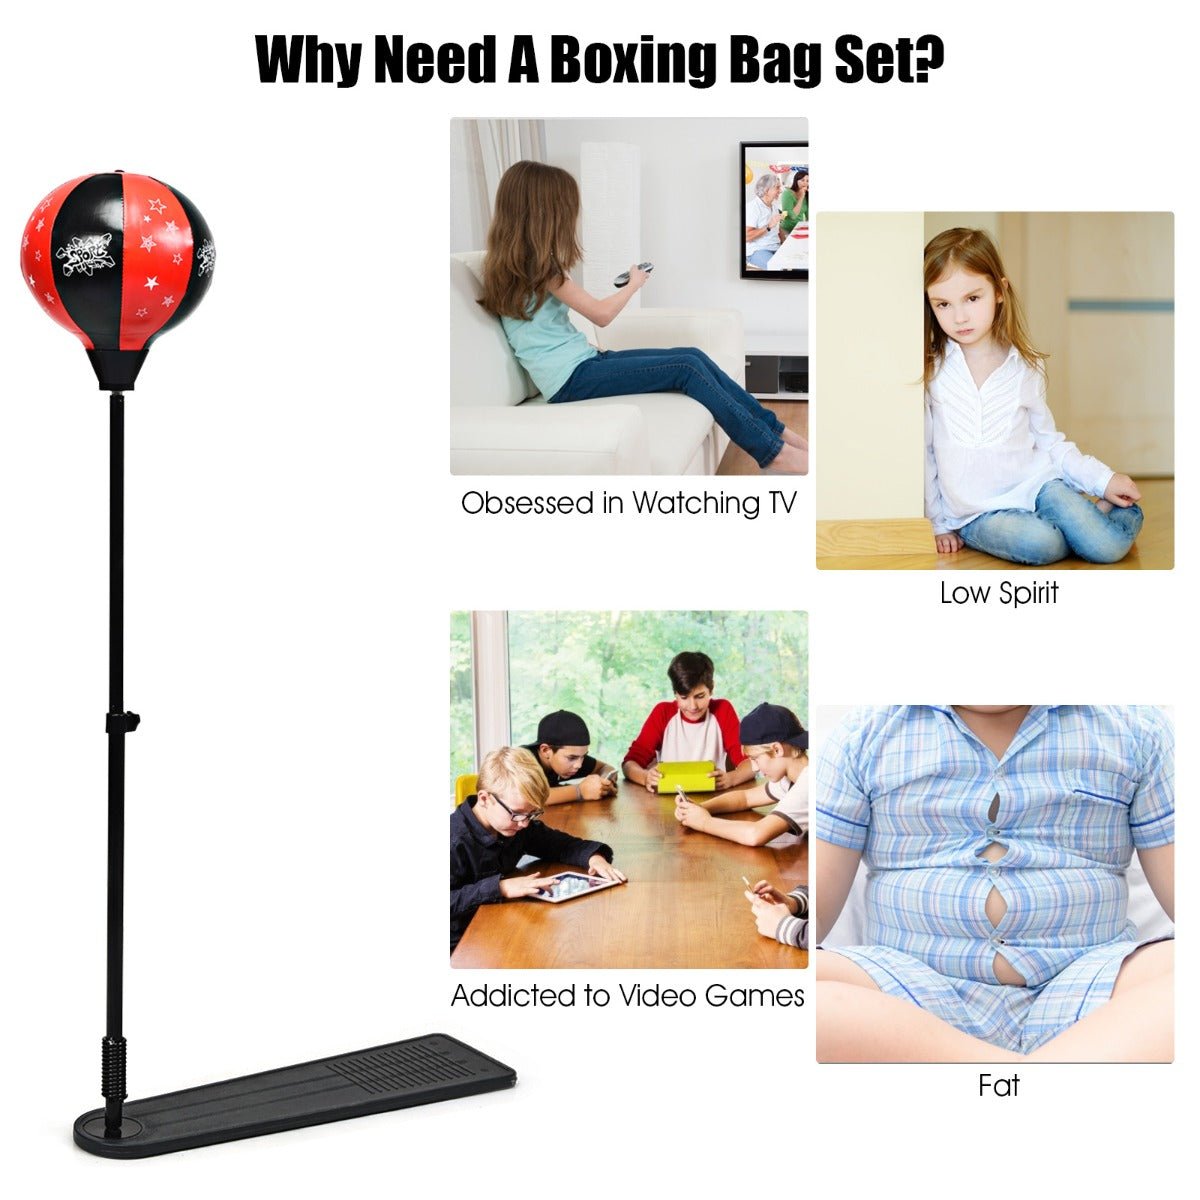 Shop Now for Inflatable Boxing Fun